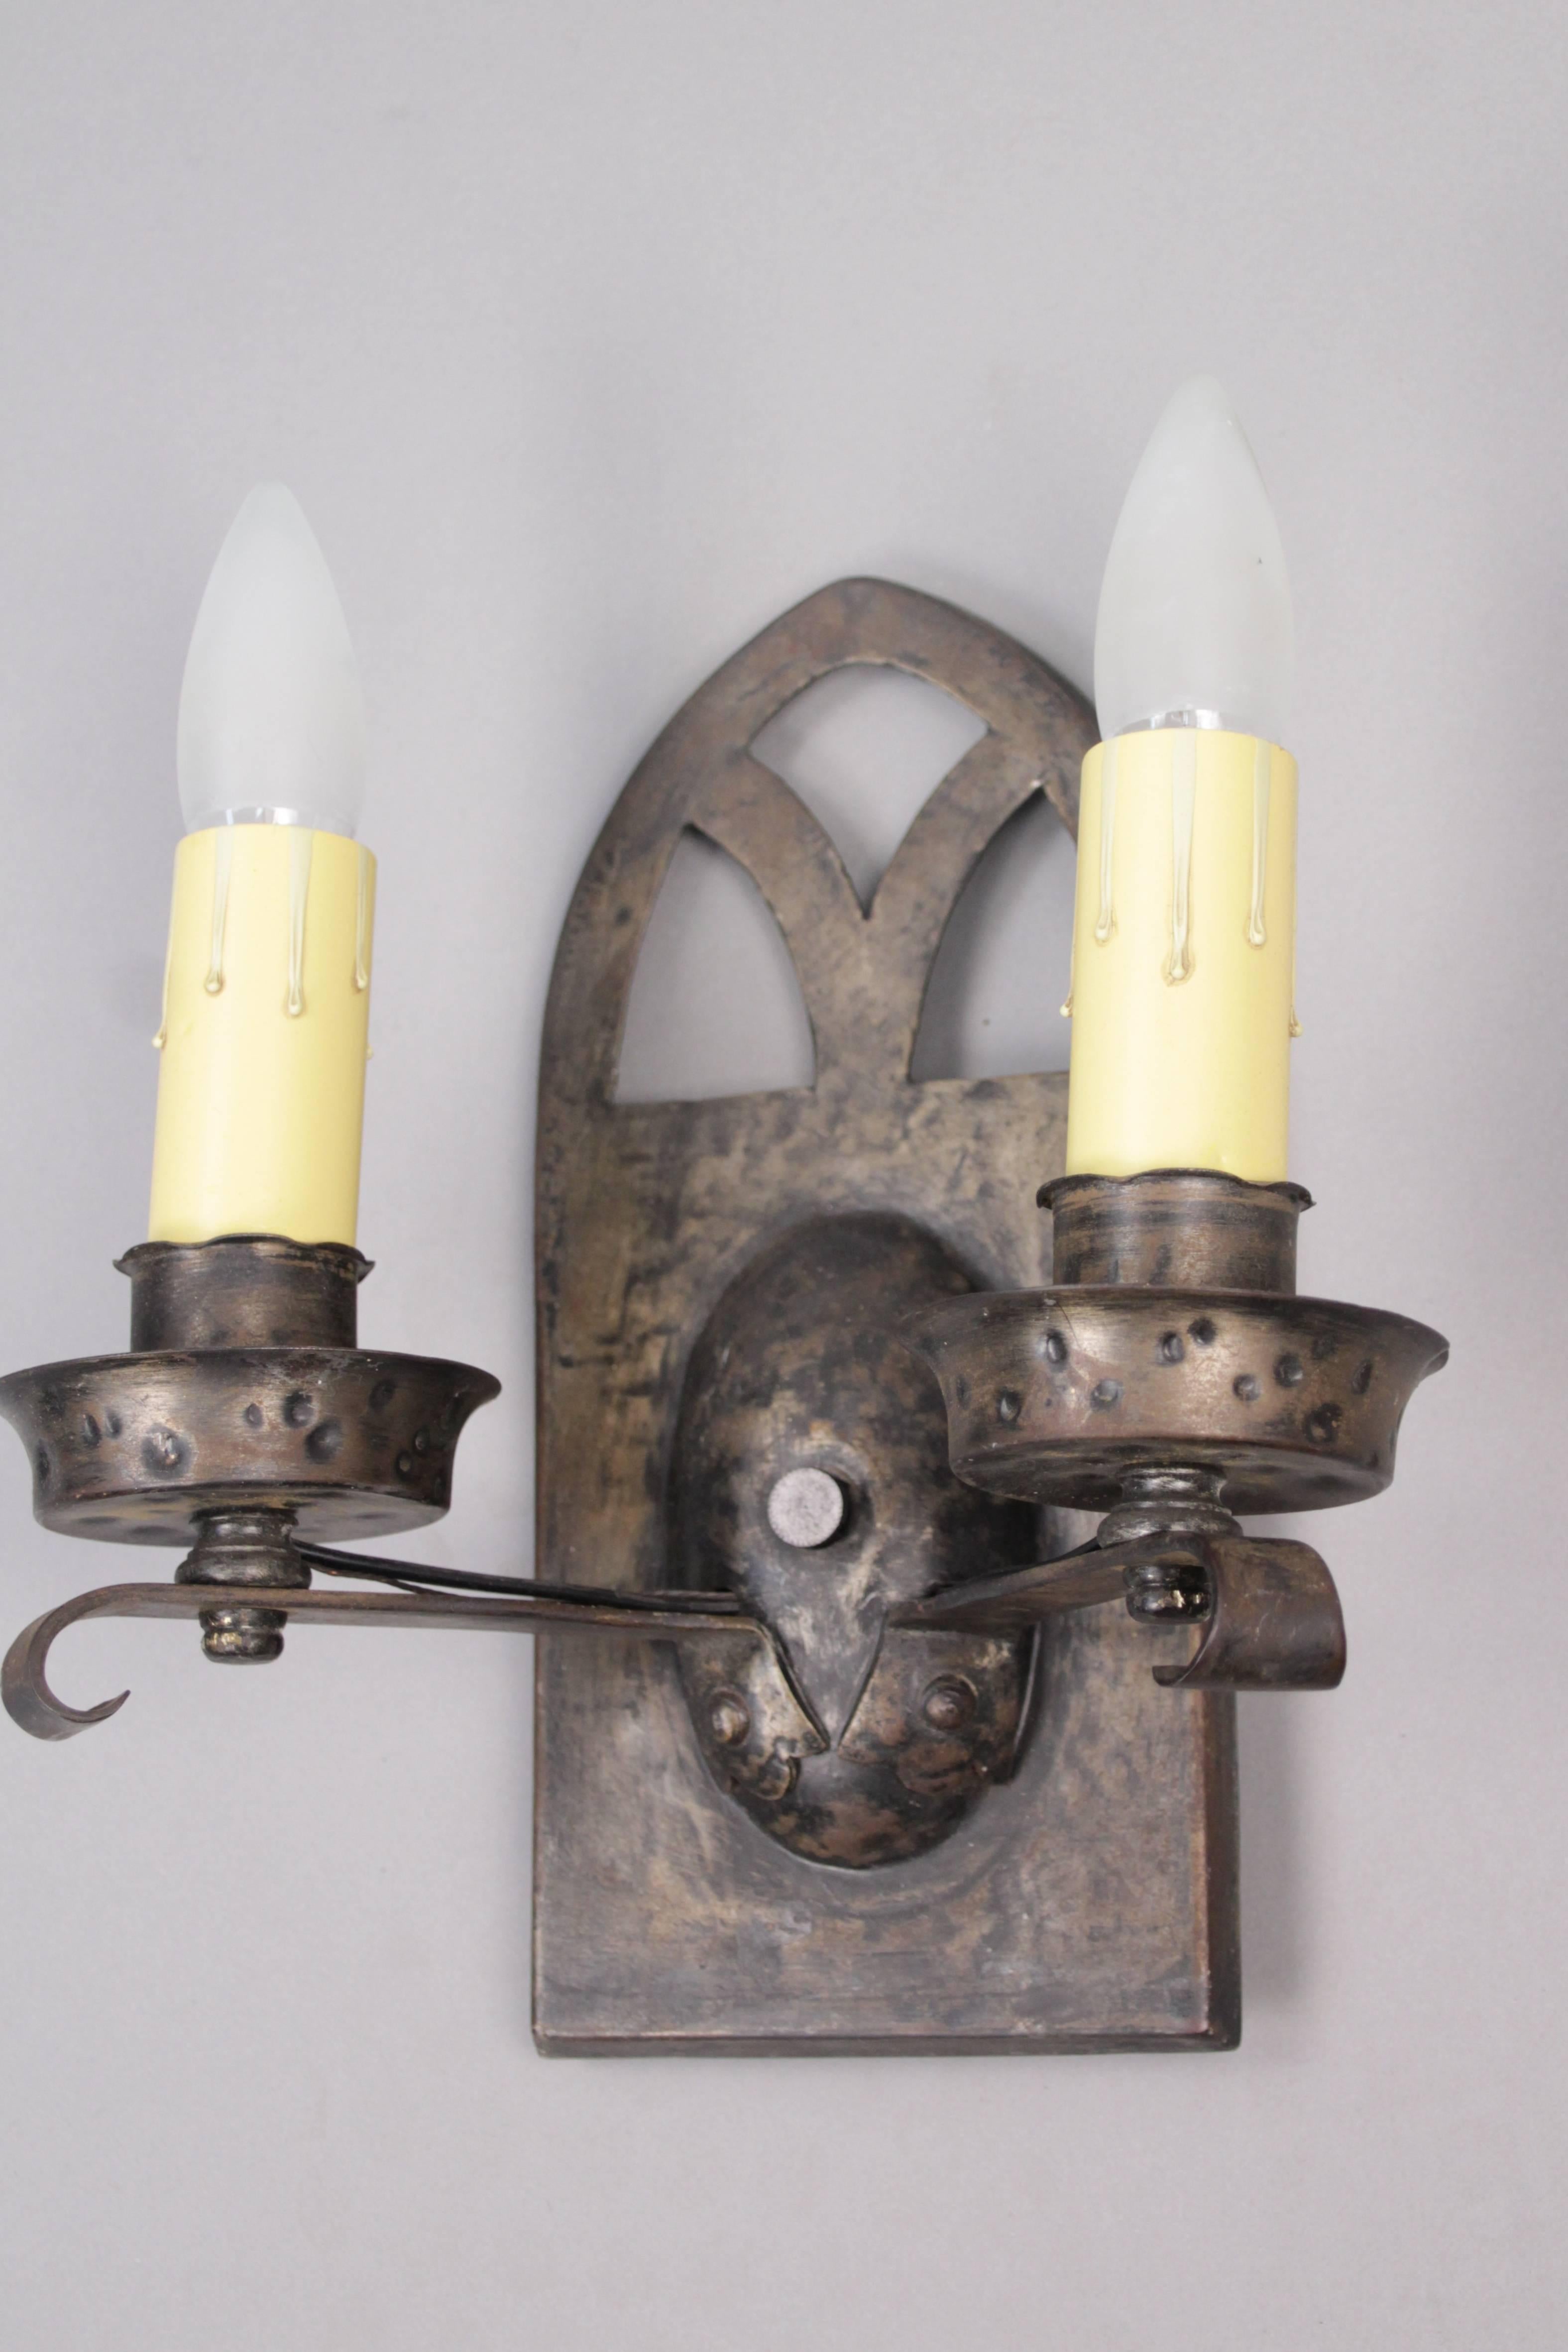 Priced and sold individually. One of four double light sconces with hammered finish, circa 1920s.